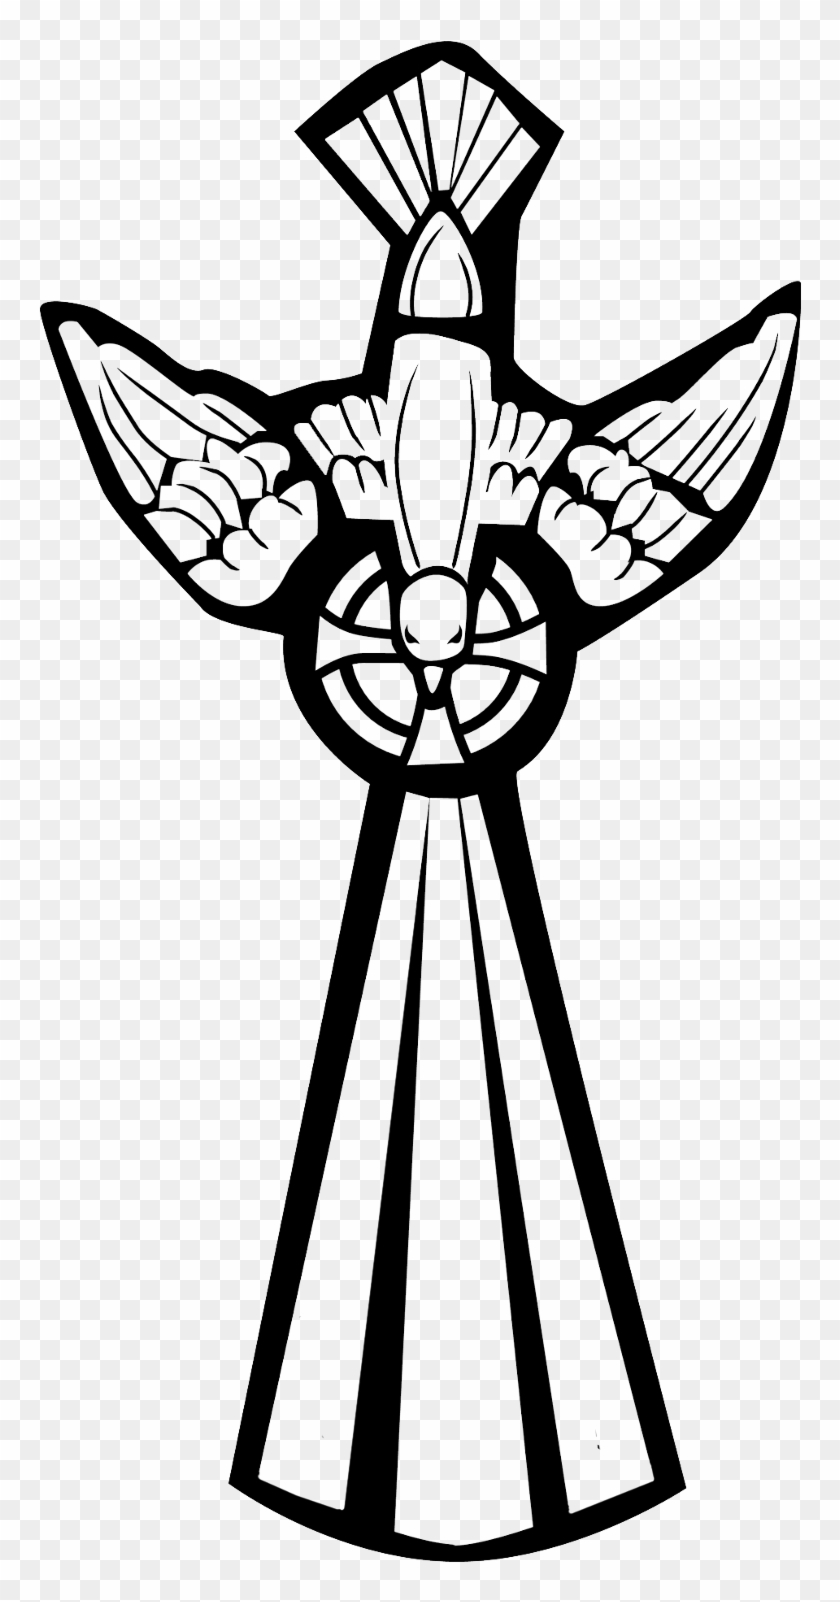 This Year's Confirmation Celebration At St - Celtic Cross Clip Art #464425